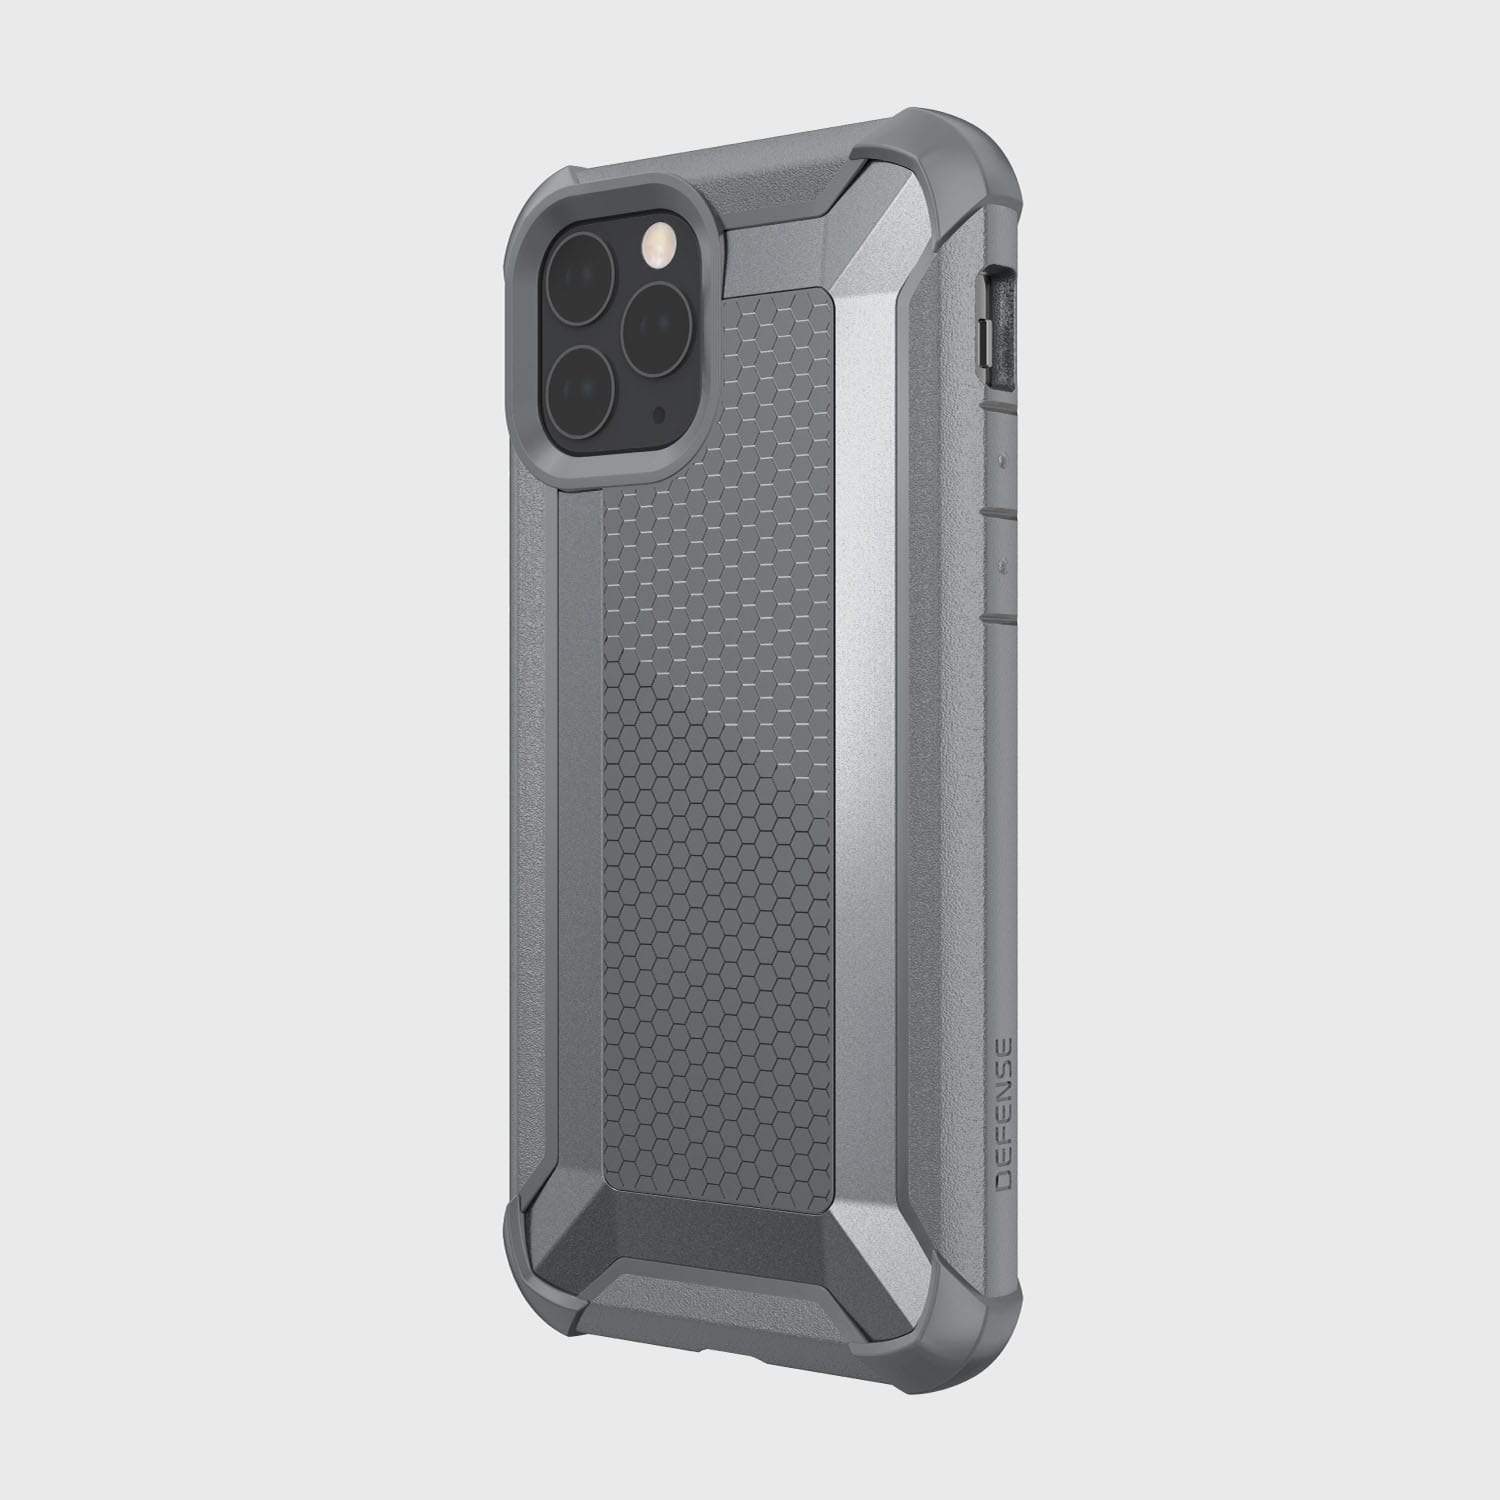 Capture the back view of the Raptic Tactical protective iPhone 11 Pro Max case showcasing its shock-absorbing rubber exterior and military-grade durability as per Military Standard MIL-STD-810G.